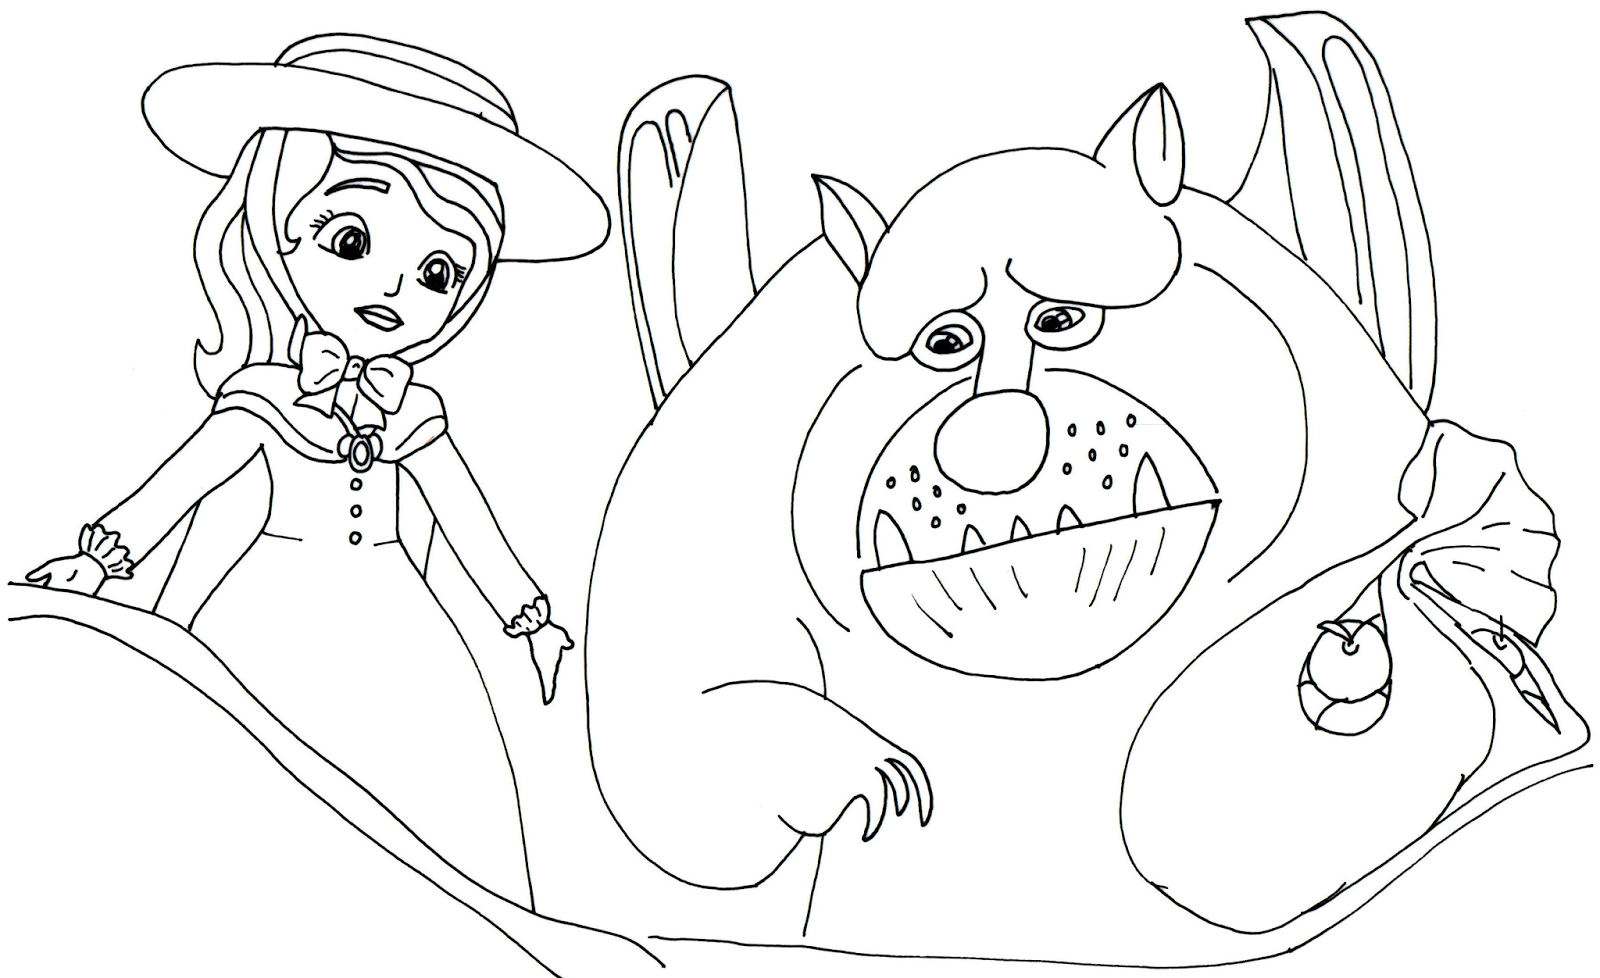 sofia-the-first-coloring-page-0071-q1